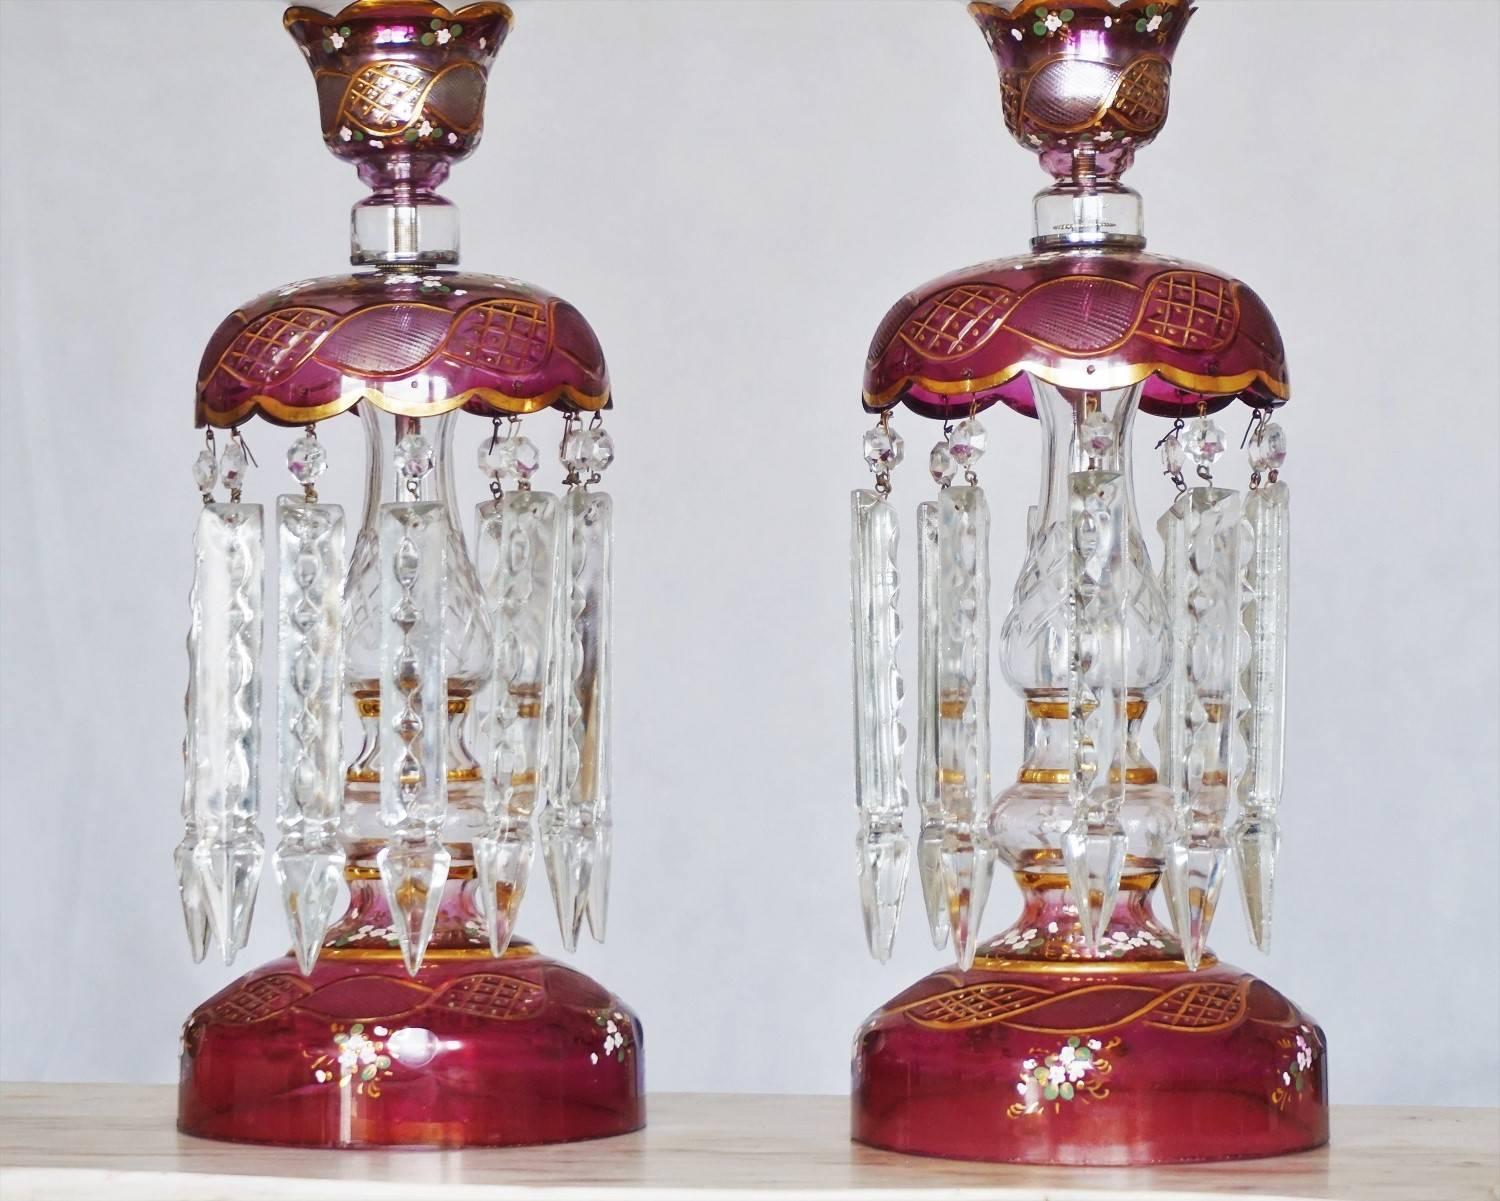 Czech Pair of Bohemian Cranberry Cut-Glass Hand-Painted Lustres Lamps, circa 1920